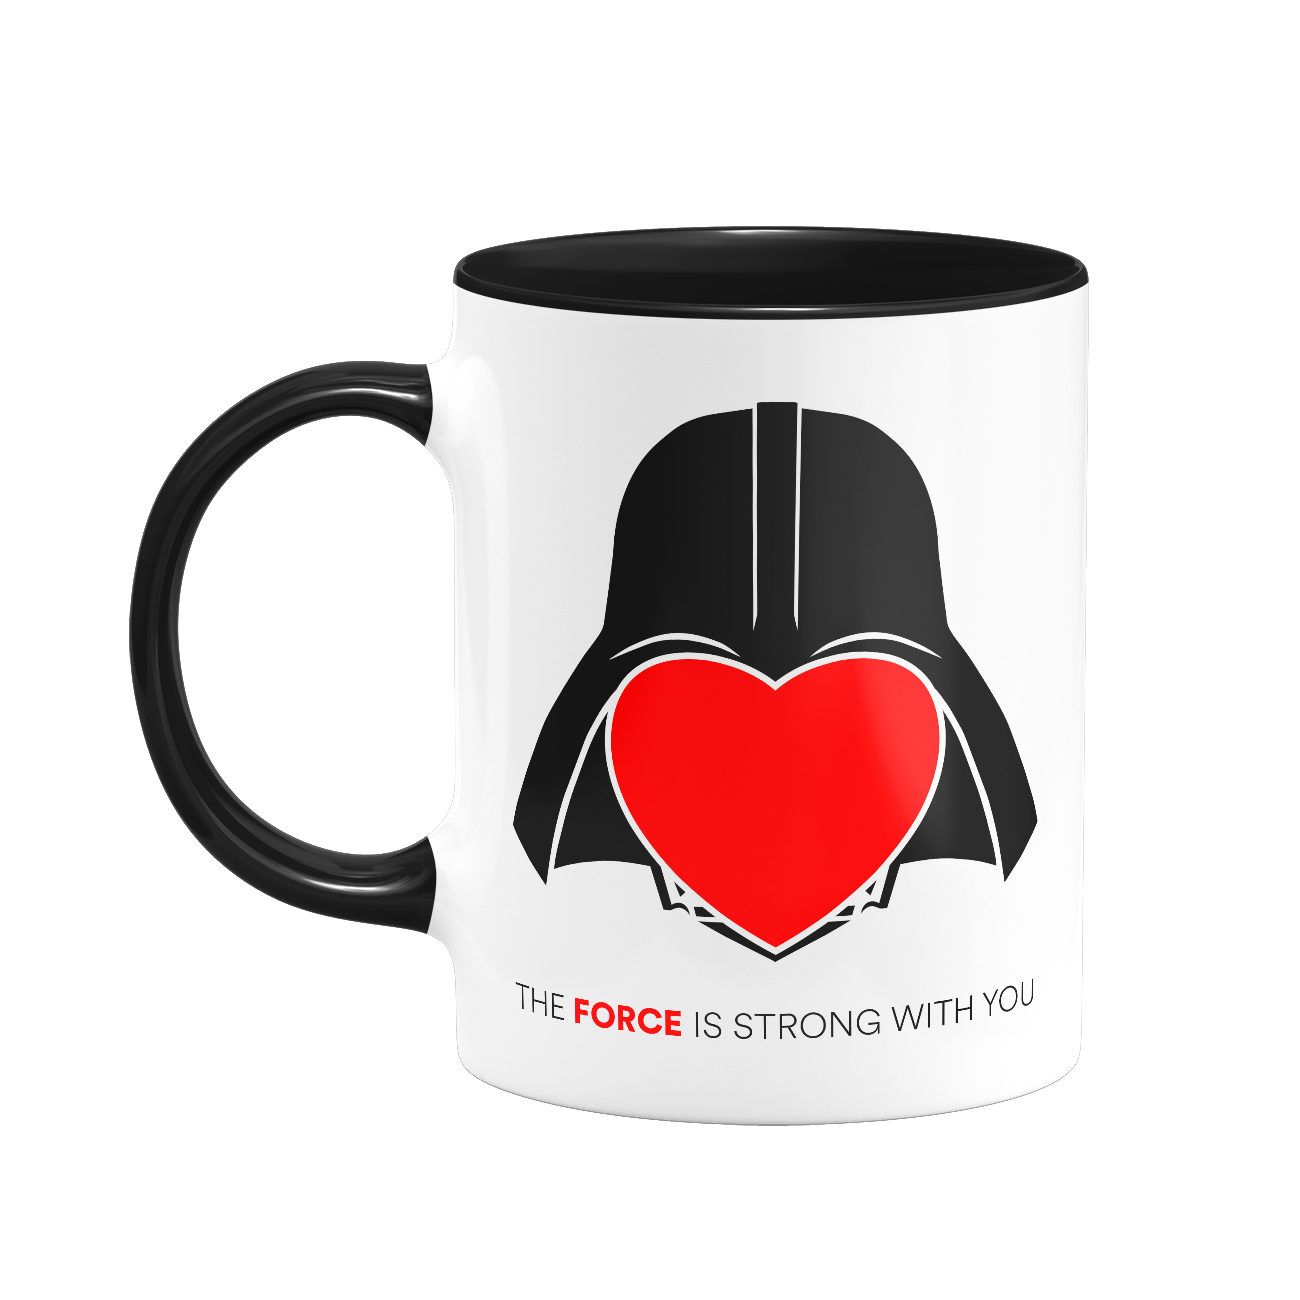 Caneca - The force is strong with you (Darth Vader)